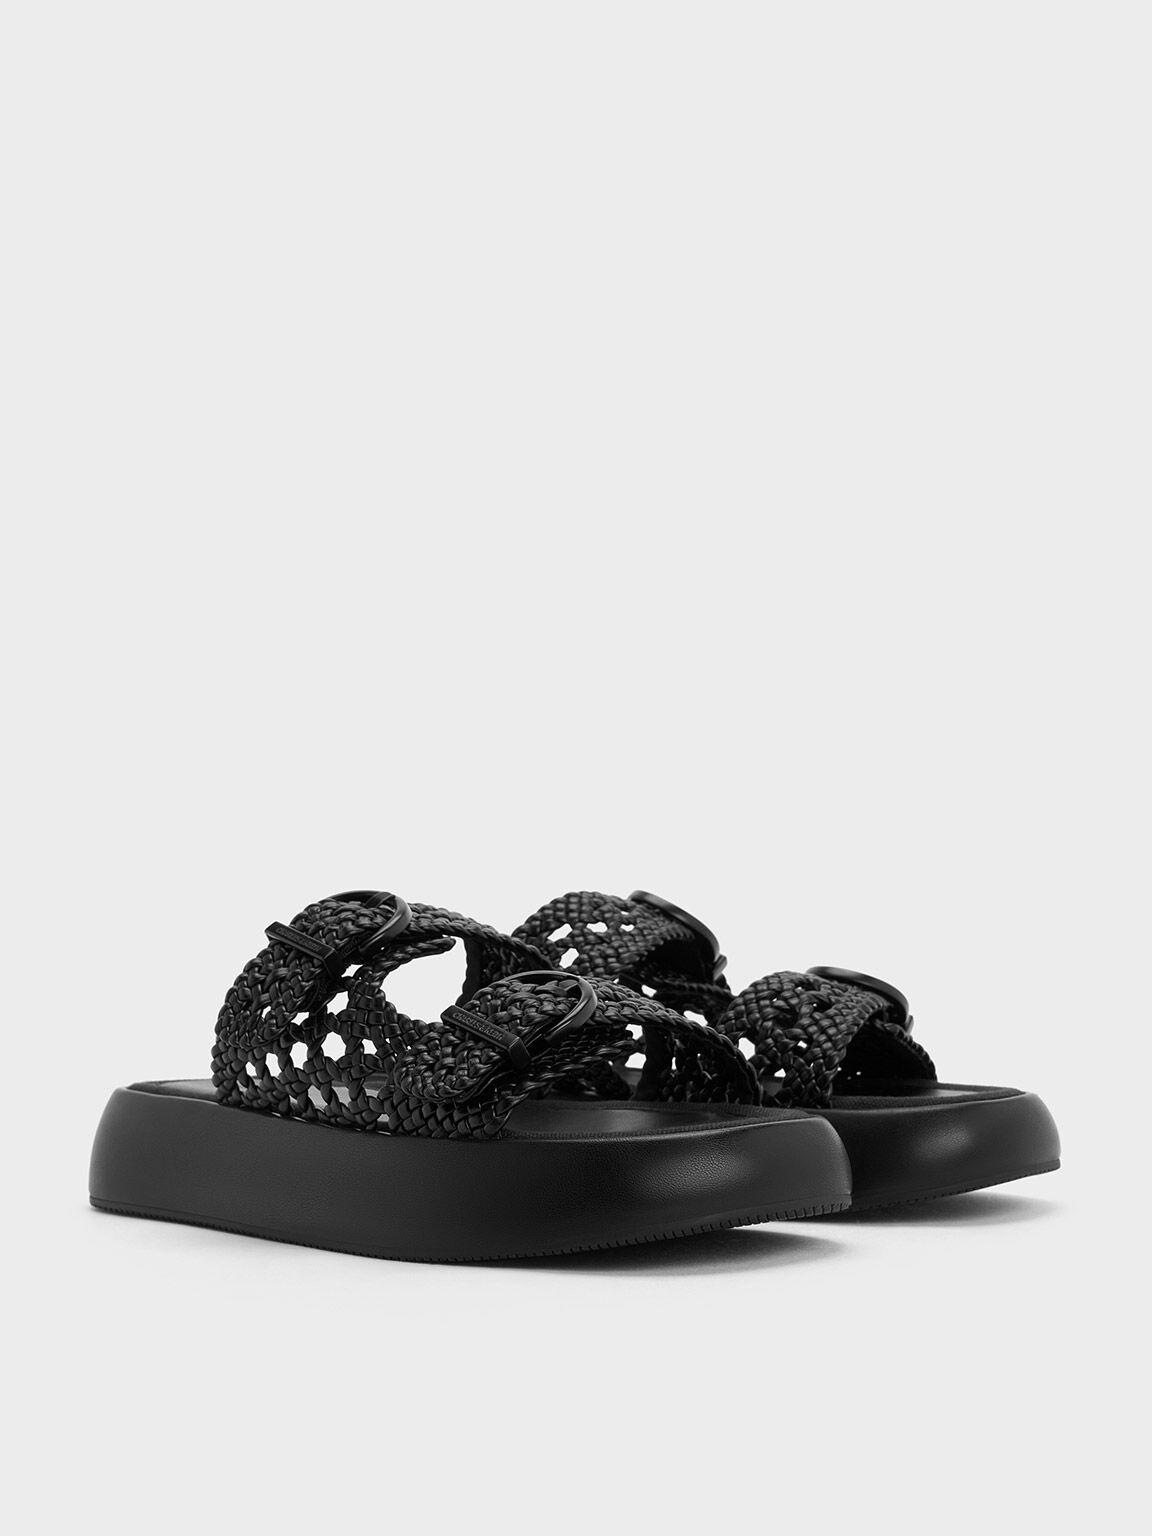 Woven Double-Strap Buckled Sandals, Black, hi-res